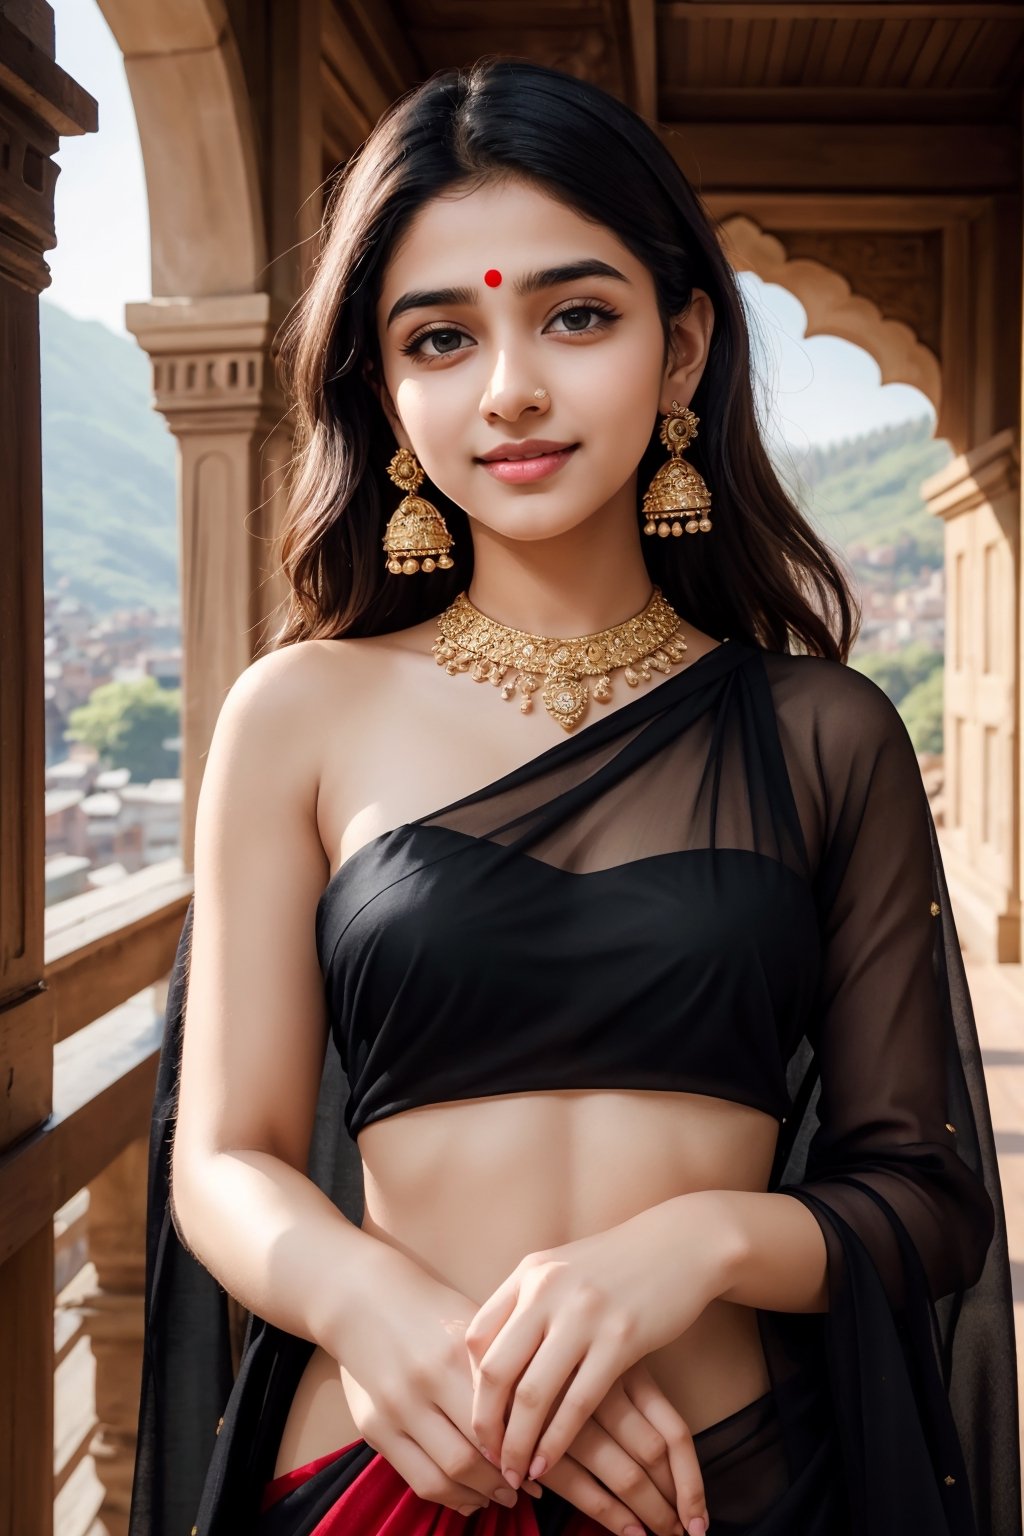 lovely cute young attractive indian teenage girl in a black transparent saree, an Instagram model, long blonde_hair, colorful hair, guloband, smiling  face, pahadi girl,  winter, Indian, shimla in background, forehead ornament, big ear rings, touch forehead ornament, full length, single red color dot on forhead, blushing, bangles